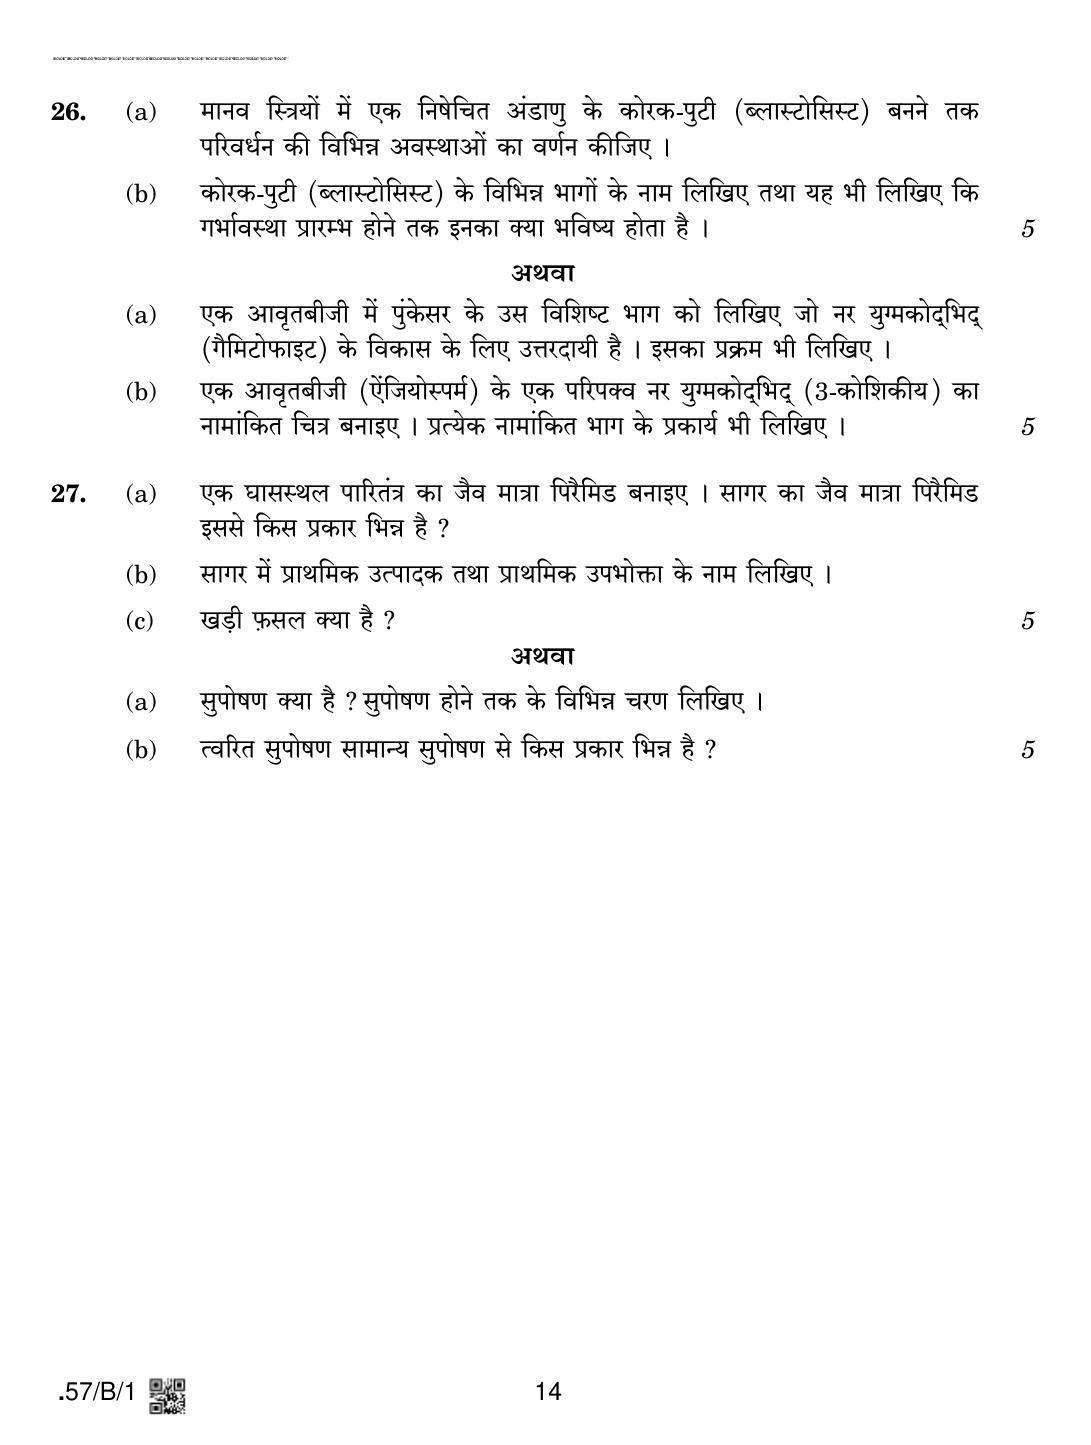 CBSE Class 12 57-C-1 - Biology 2020 Compartment Question Paper - Page 14